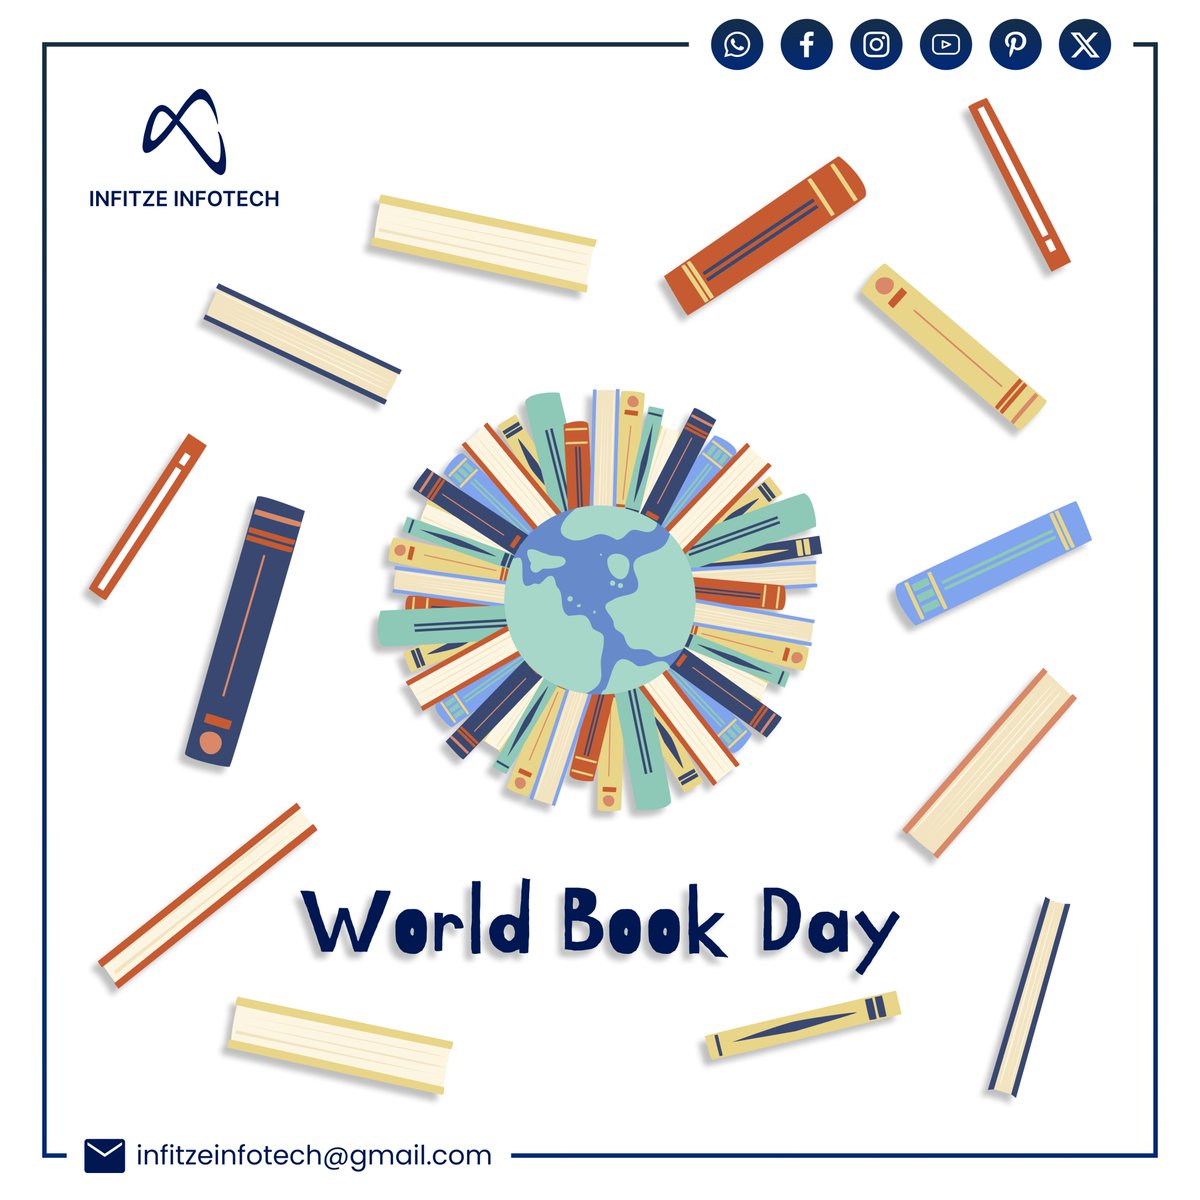 📚 Celebrate World Book Day with Infitze Infotech! 🌟

Just as books open doors to new worlds, our mobile apps and websites open doors to endless possibilities. Let's create something extraordinary together! 🚀

#infitzeinfotech #worldbookday #appdevelopment #websitecreation